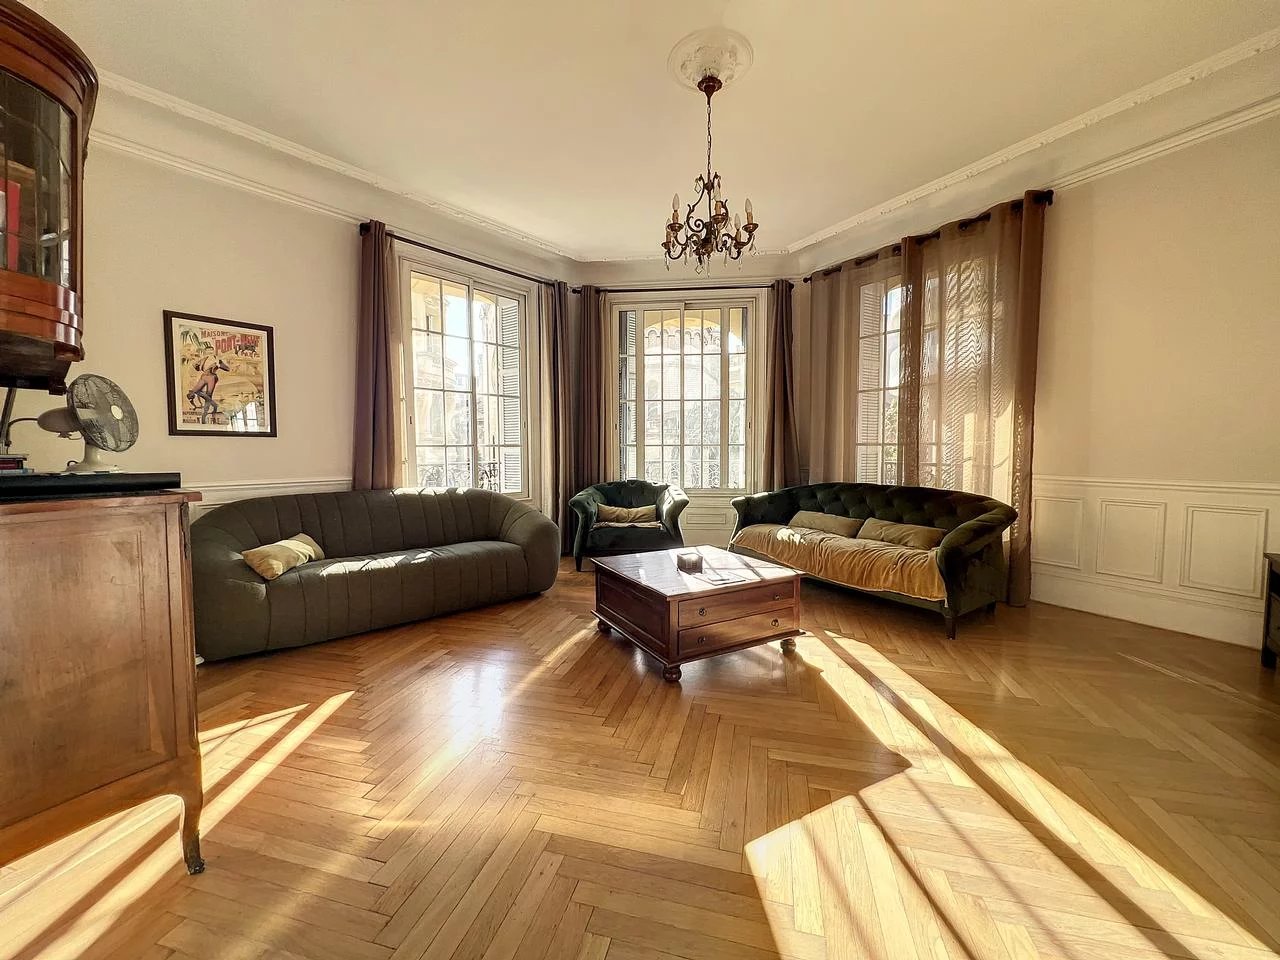 Appartement  5 Rooms 125m2  for sale   799 000 €